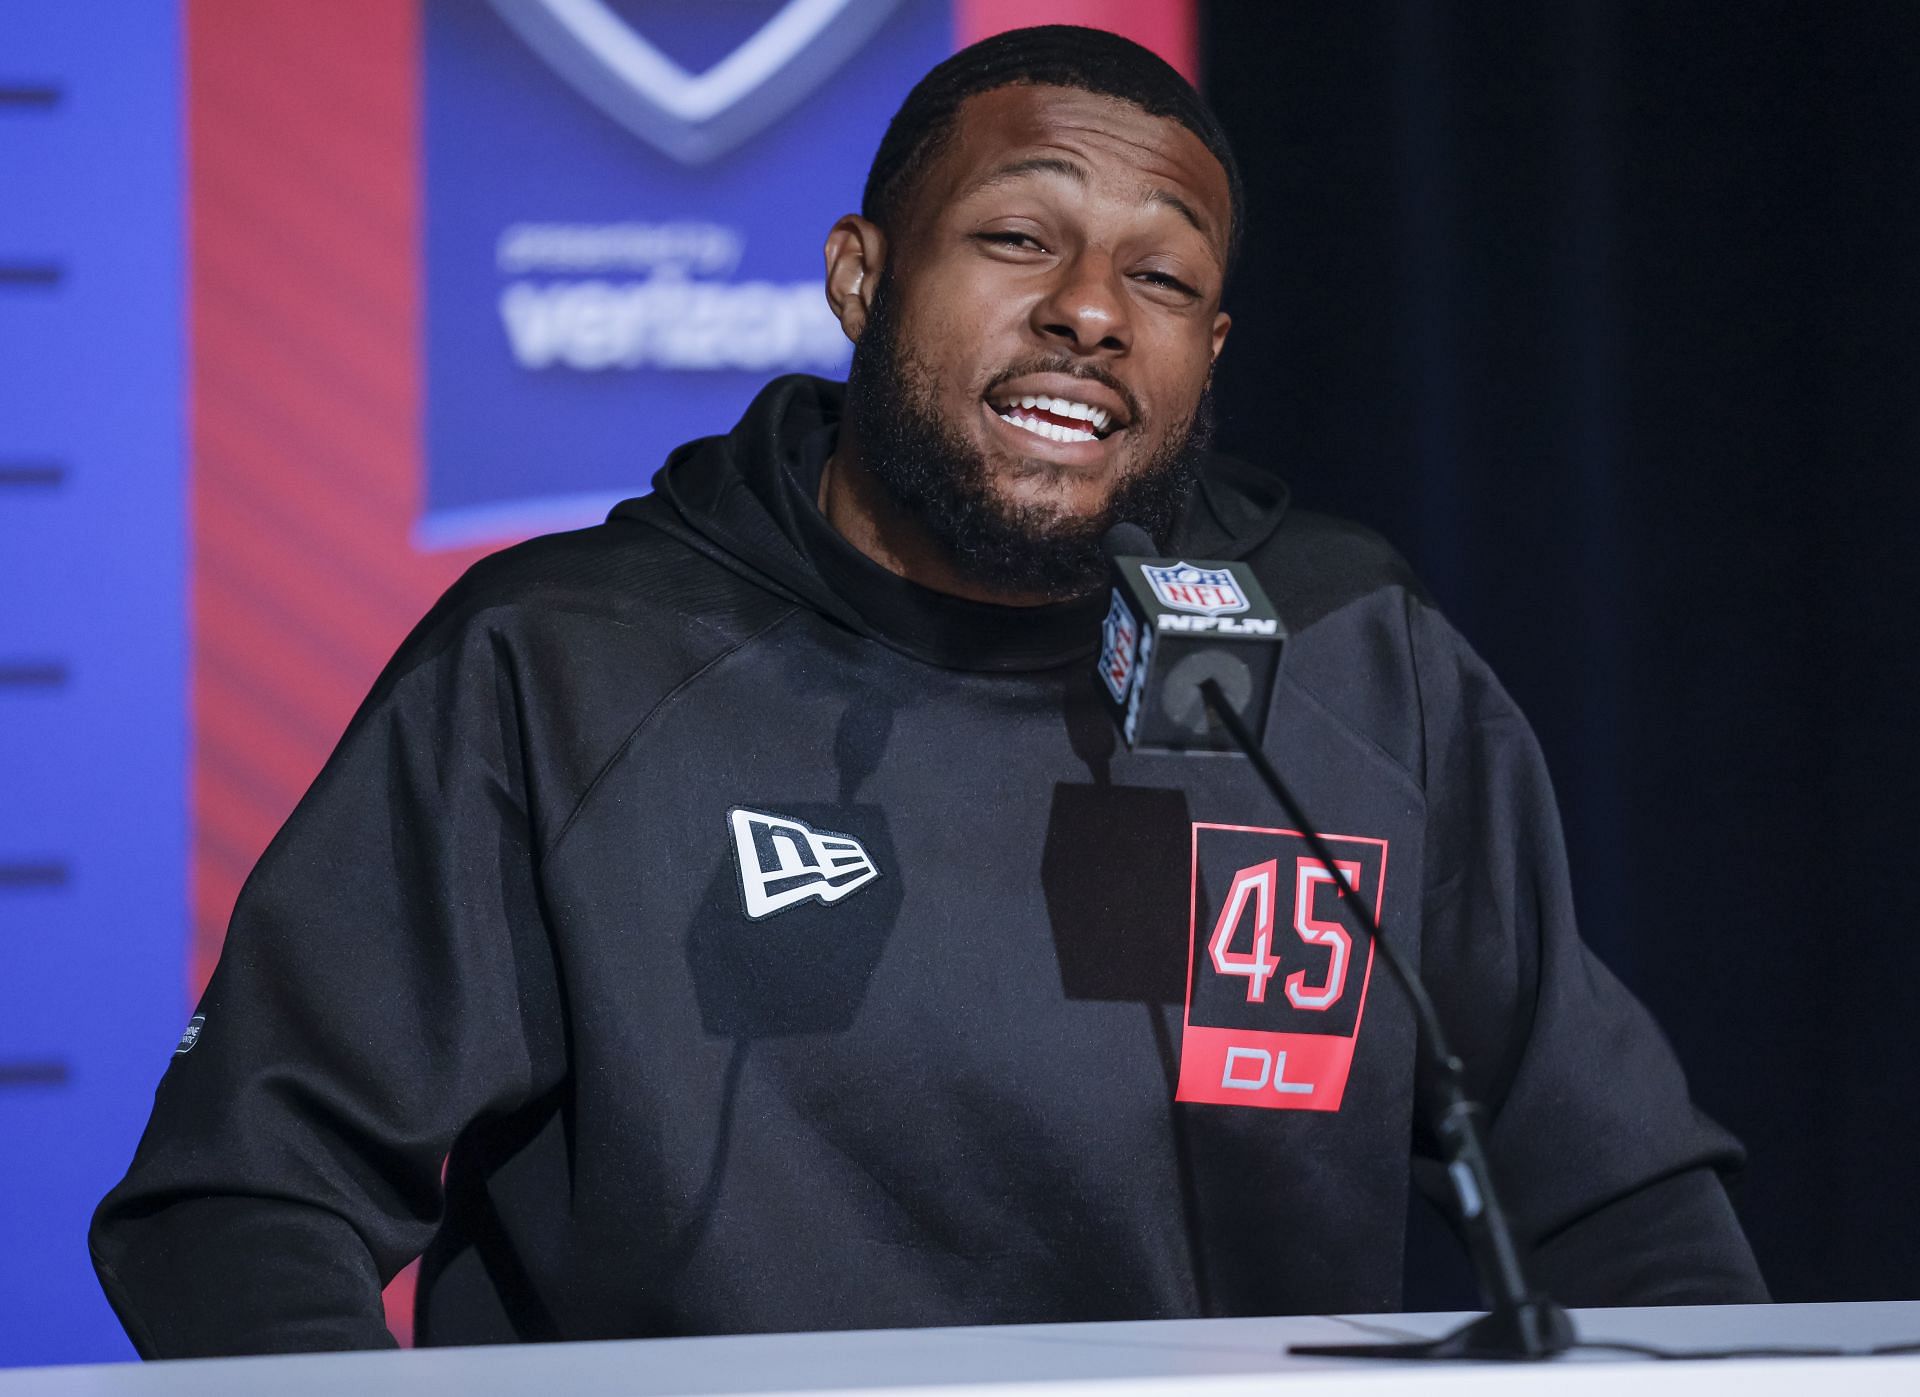 New York Giants first round NFL Draft Pick Kayvon Thibodeaux speaks to reporters at the NFL Draft Combine in Indianapolis, Indiana, on March 4th, 2022